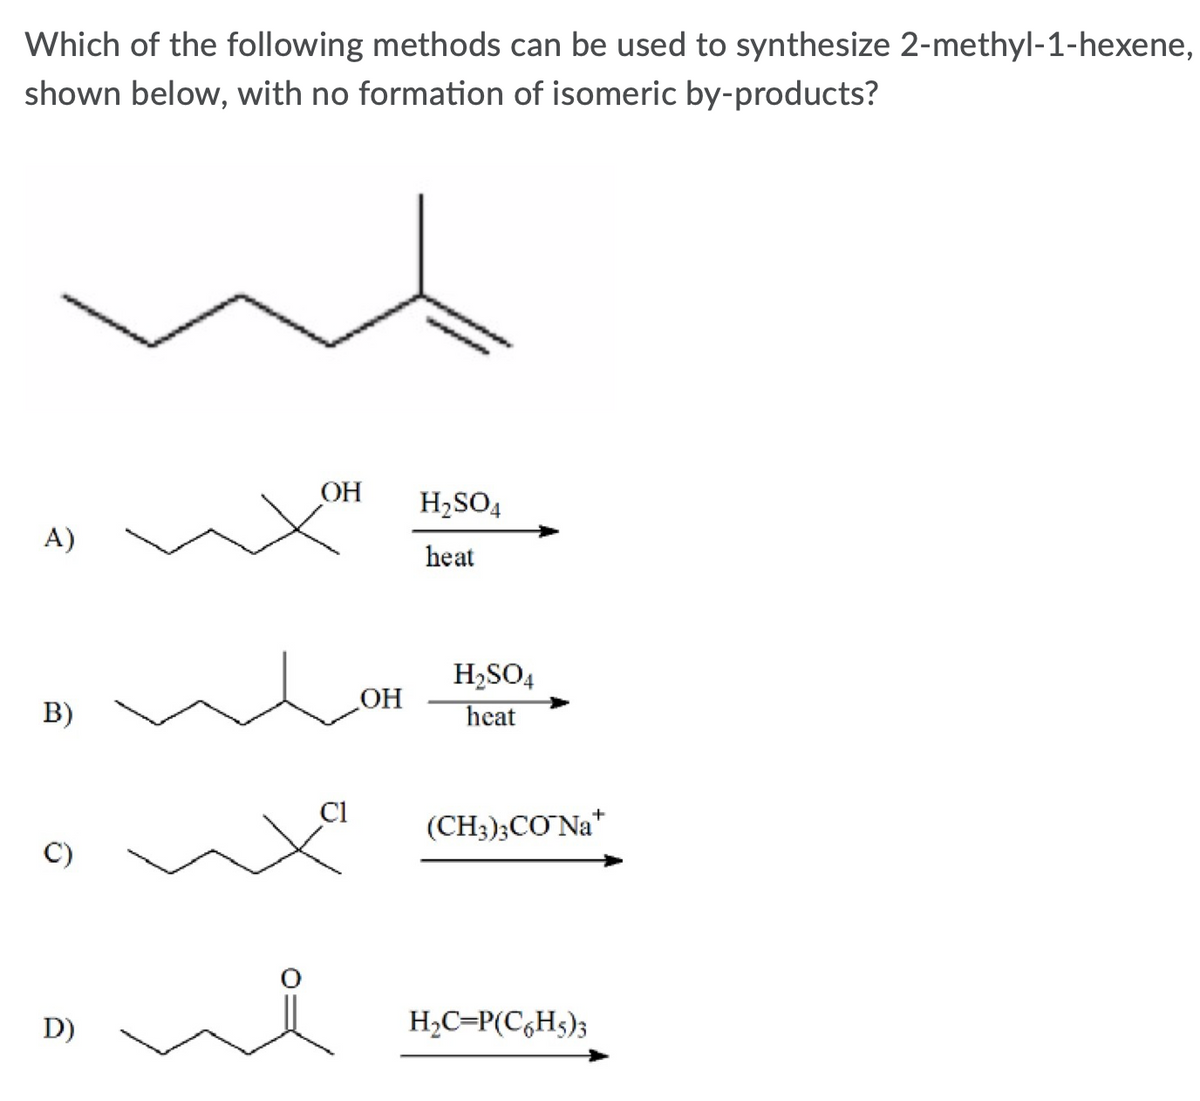 Which of the following methods can be used to synthesize 2-methyl-1-hexene,
shown below, with no formation of isomeric by-products?
ОН
H2SO4
A)
heat
H2SO4
OH
B)
heat
Ci
(CH3);CO Na*
+
D)
H2C=P(C,H5);
